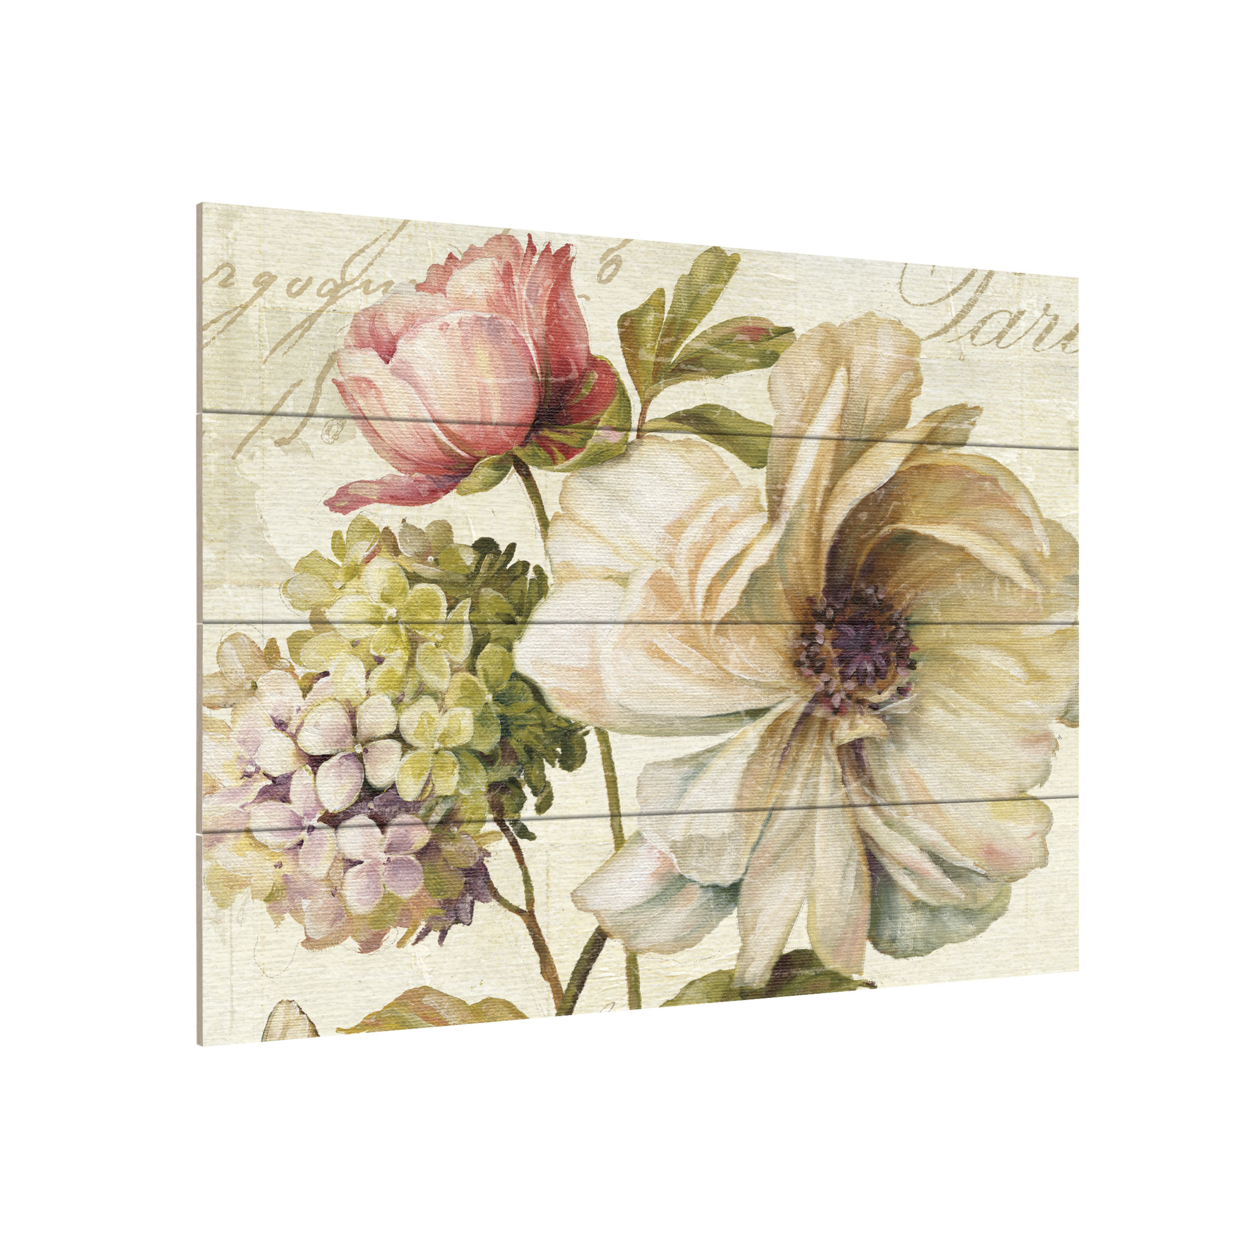 Wall Art 12 X 16 Inches Titled Marche De Fleurs II Ready To Hang Printed On Wooden Planks